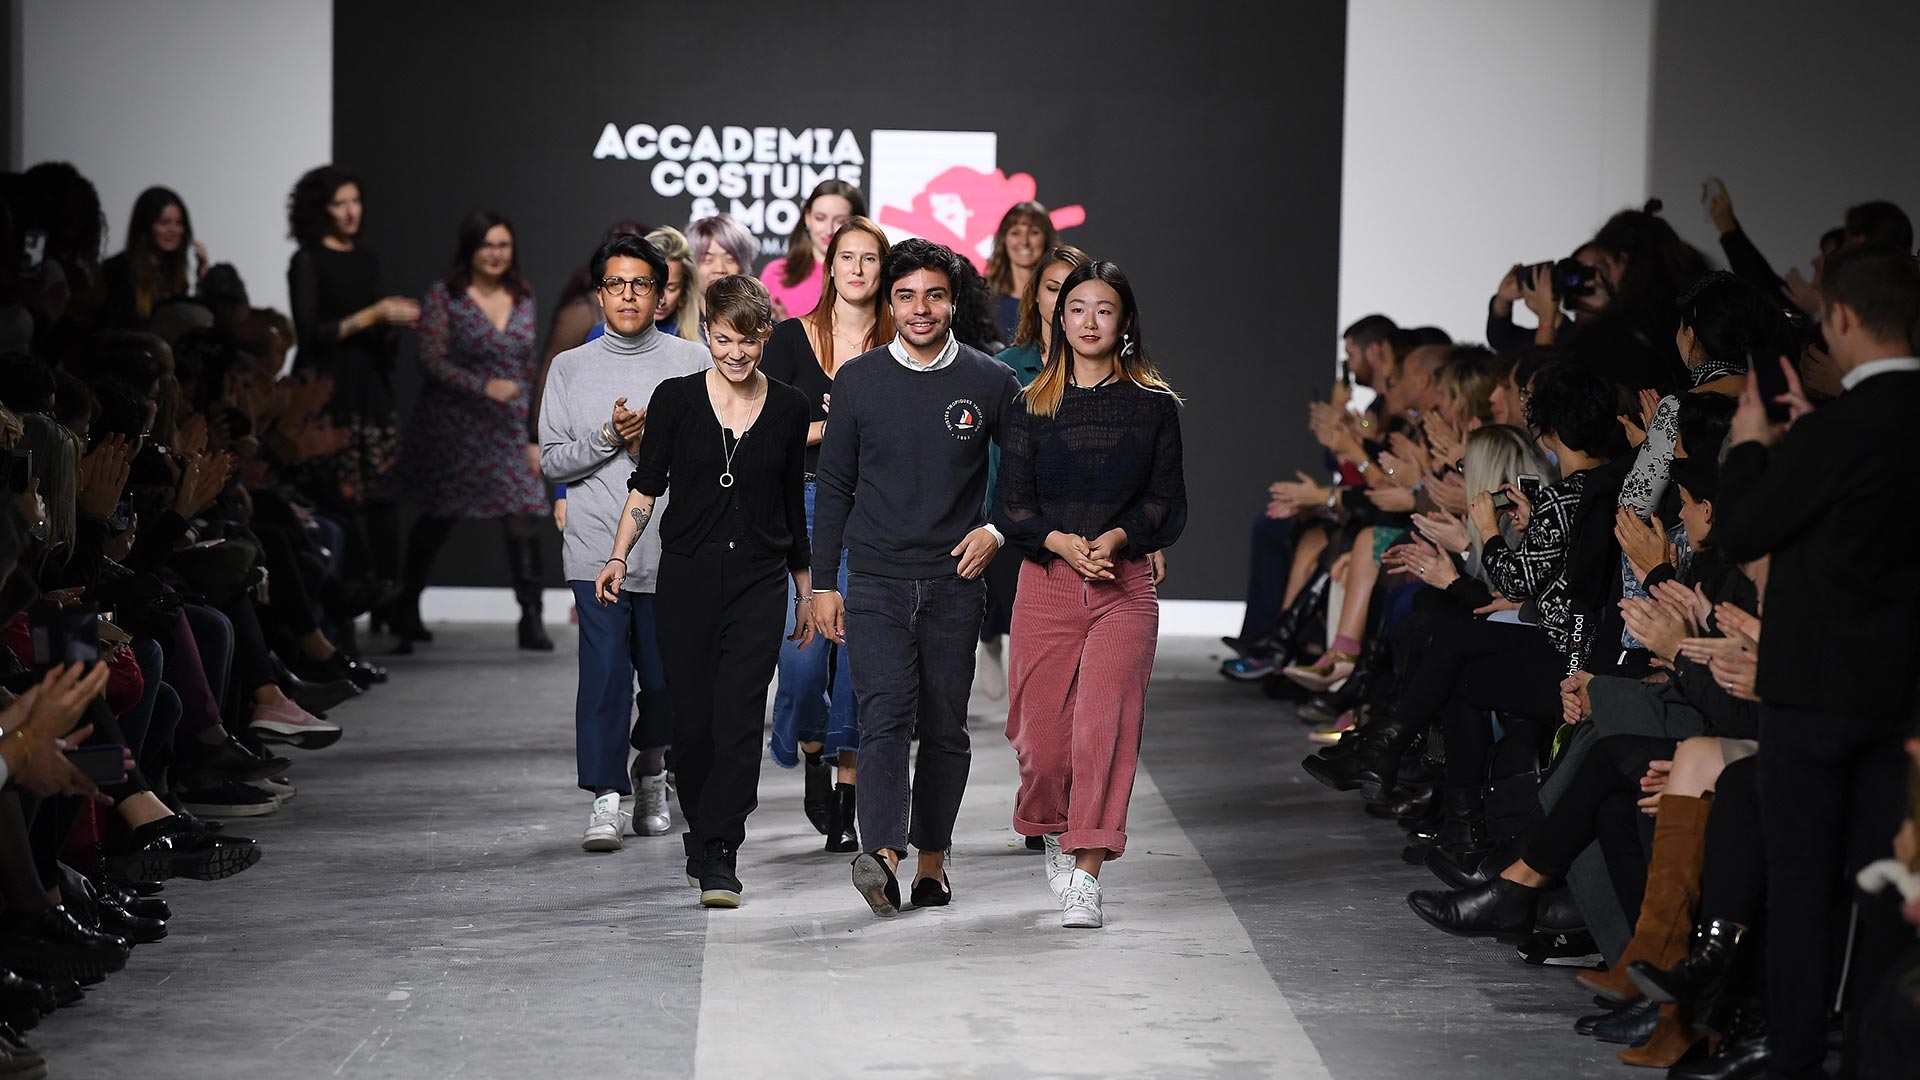 Study in Accademia Custome & Moda with Scholarship